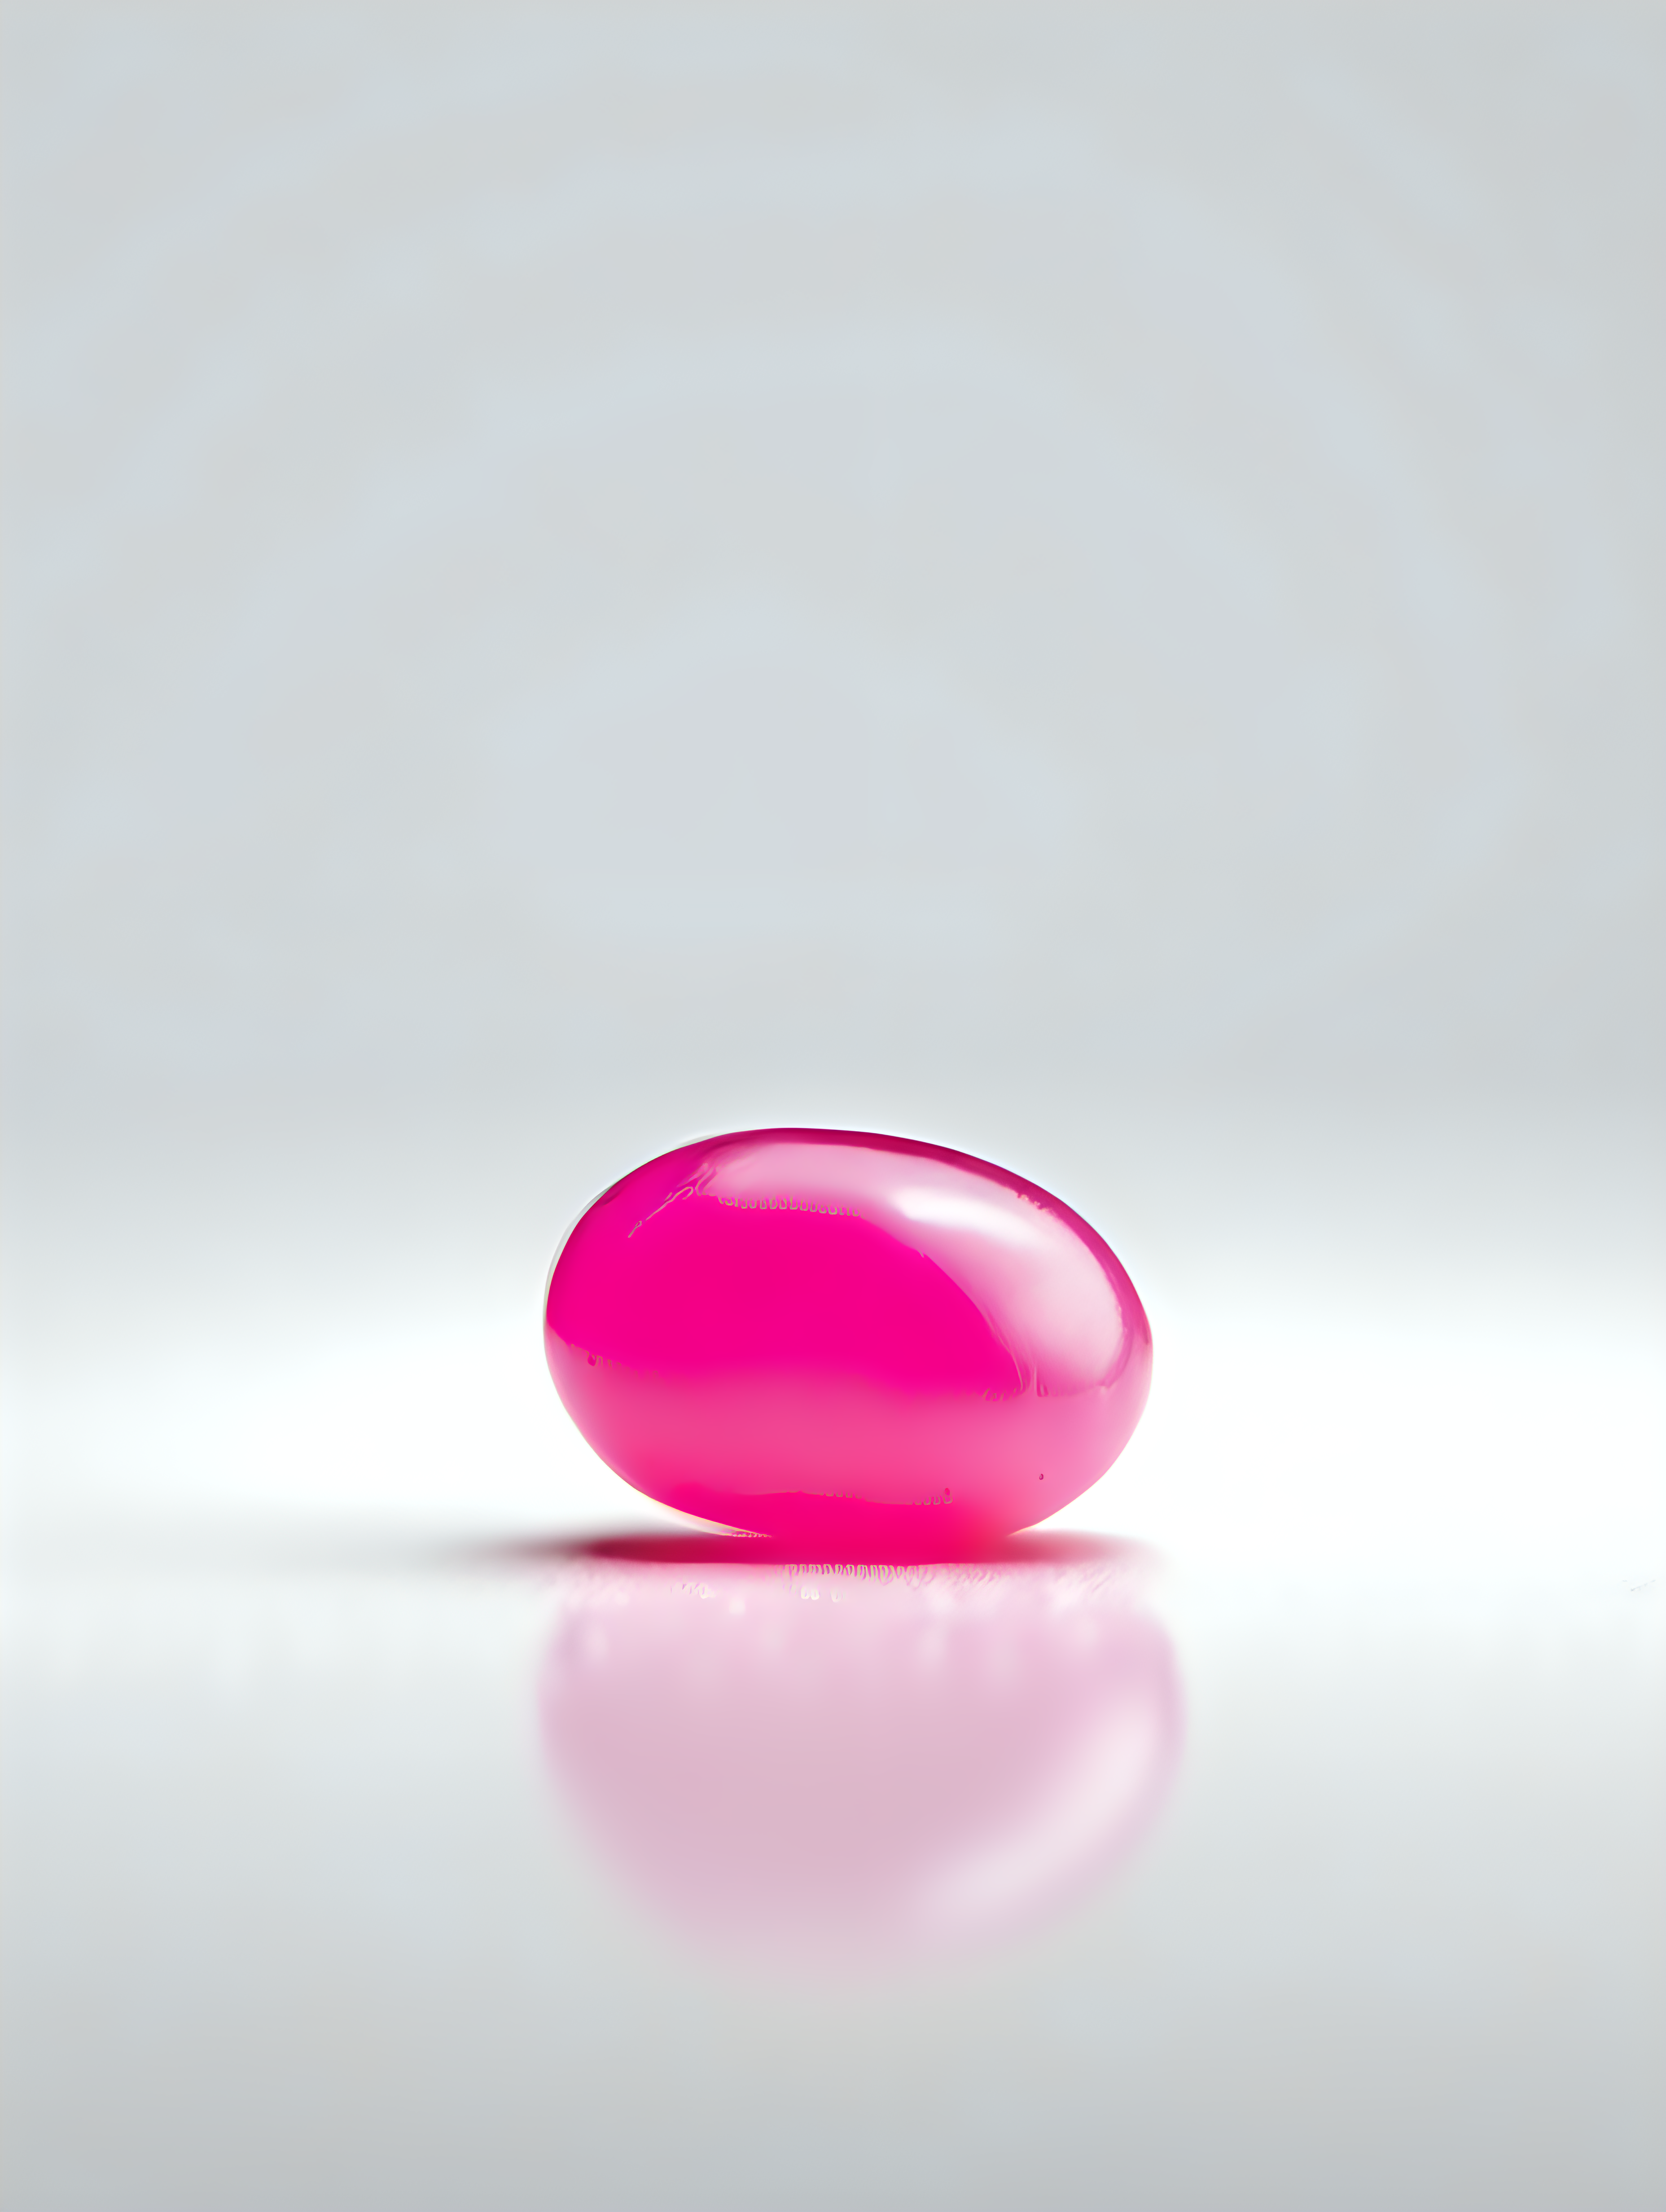 ARTISTIC STUDIO PHOTOGRAPH OF A SINGLE PINK JELLYBEAN ON A WHITE BACKGROUND
 